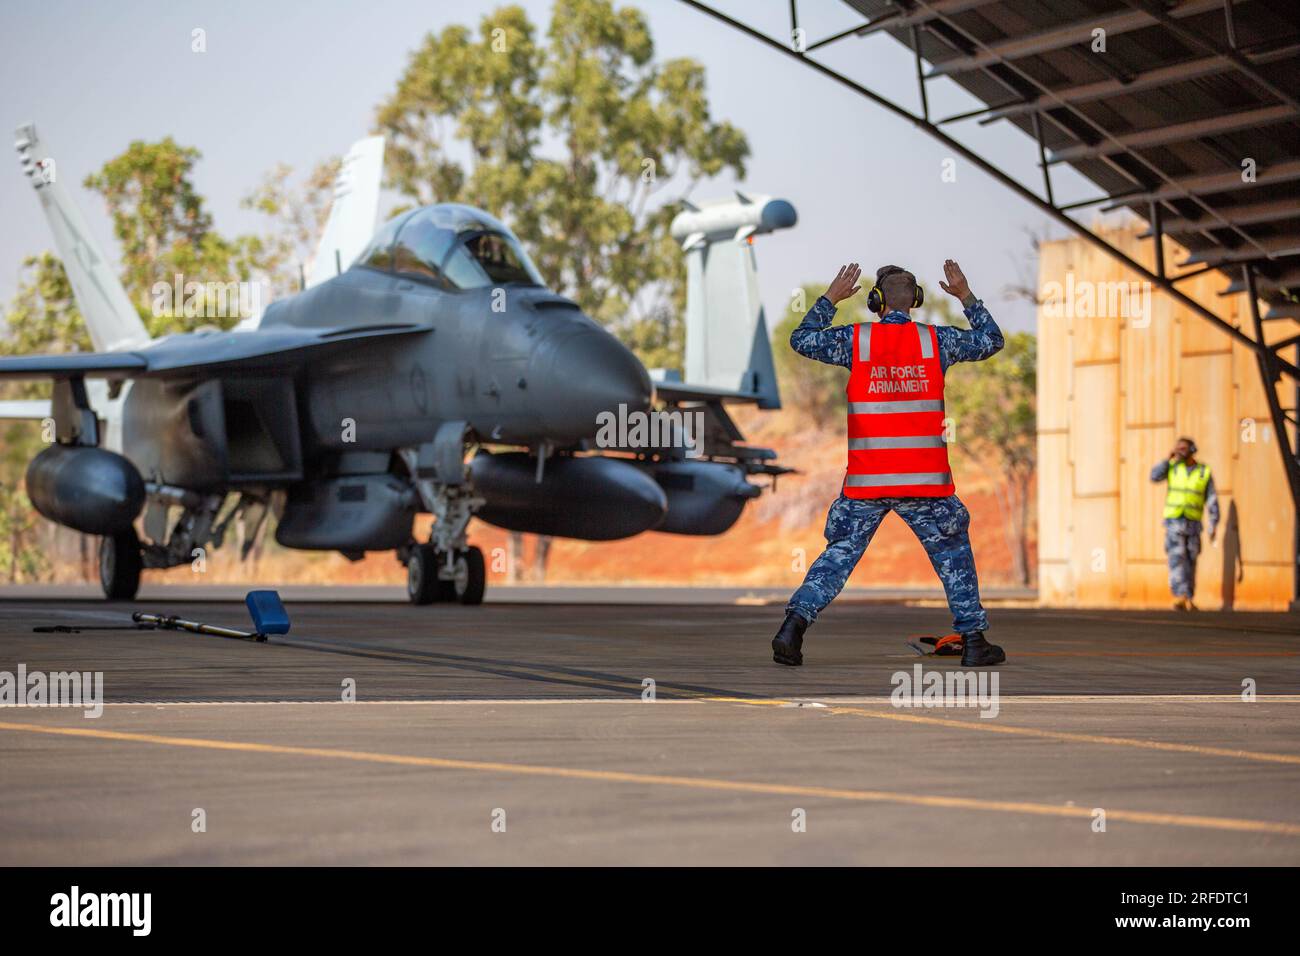 Royal Australian Air Force (RAAF) aircraft technician from No. 6 Squadron, marshals an E/A-18G Growler into an ordnance loading area after a sortie in support of Talisman Sabre 23, at RAAF Base Tindal, Northern Territory, Australia, July 27, 2023. Talisman Sabre is a U.S. Indo-Pacific Command and Australian Defense Forces joint-sponsored exercise that trains in war-fighting scenarios designed to improve U.S. and Australian combat training, readiness and interoperability. (U.S. Air Force photo by 1st Lt. Robert H. Dabbs) Stock Photo